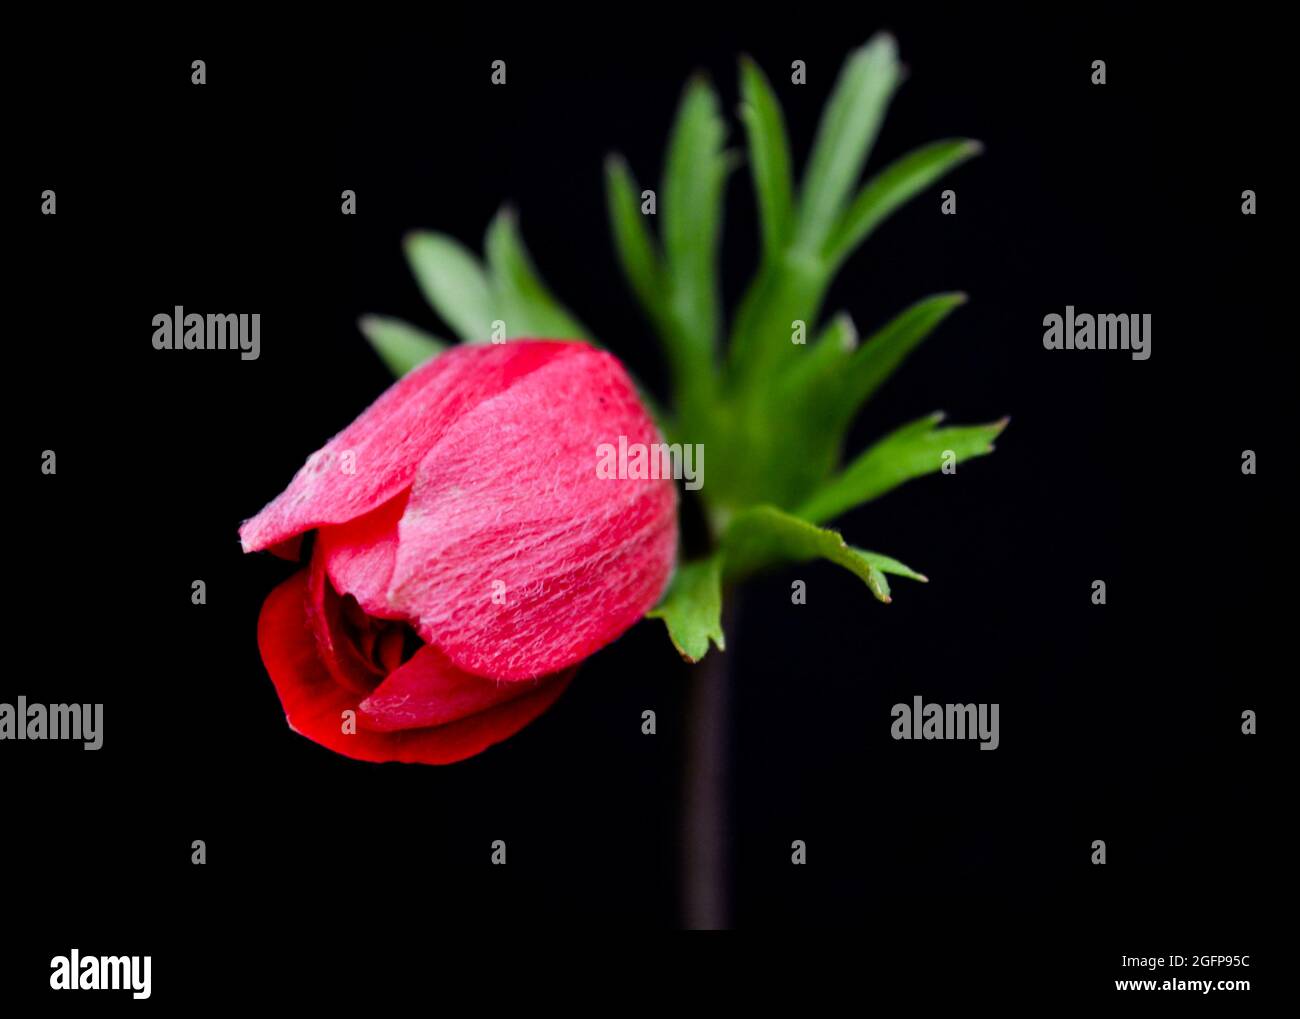 Red anemone bud beginning to open, isolated on a black background Stock Photo